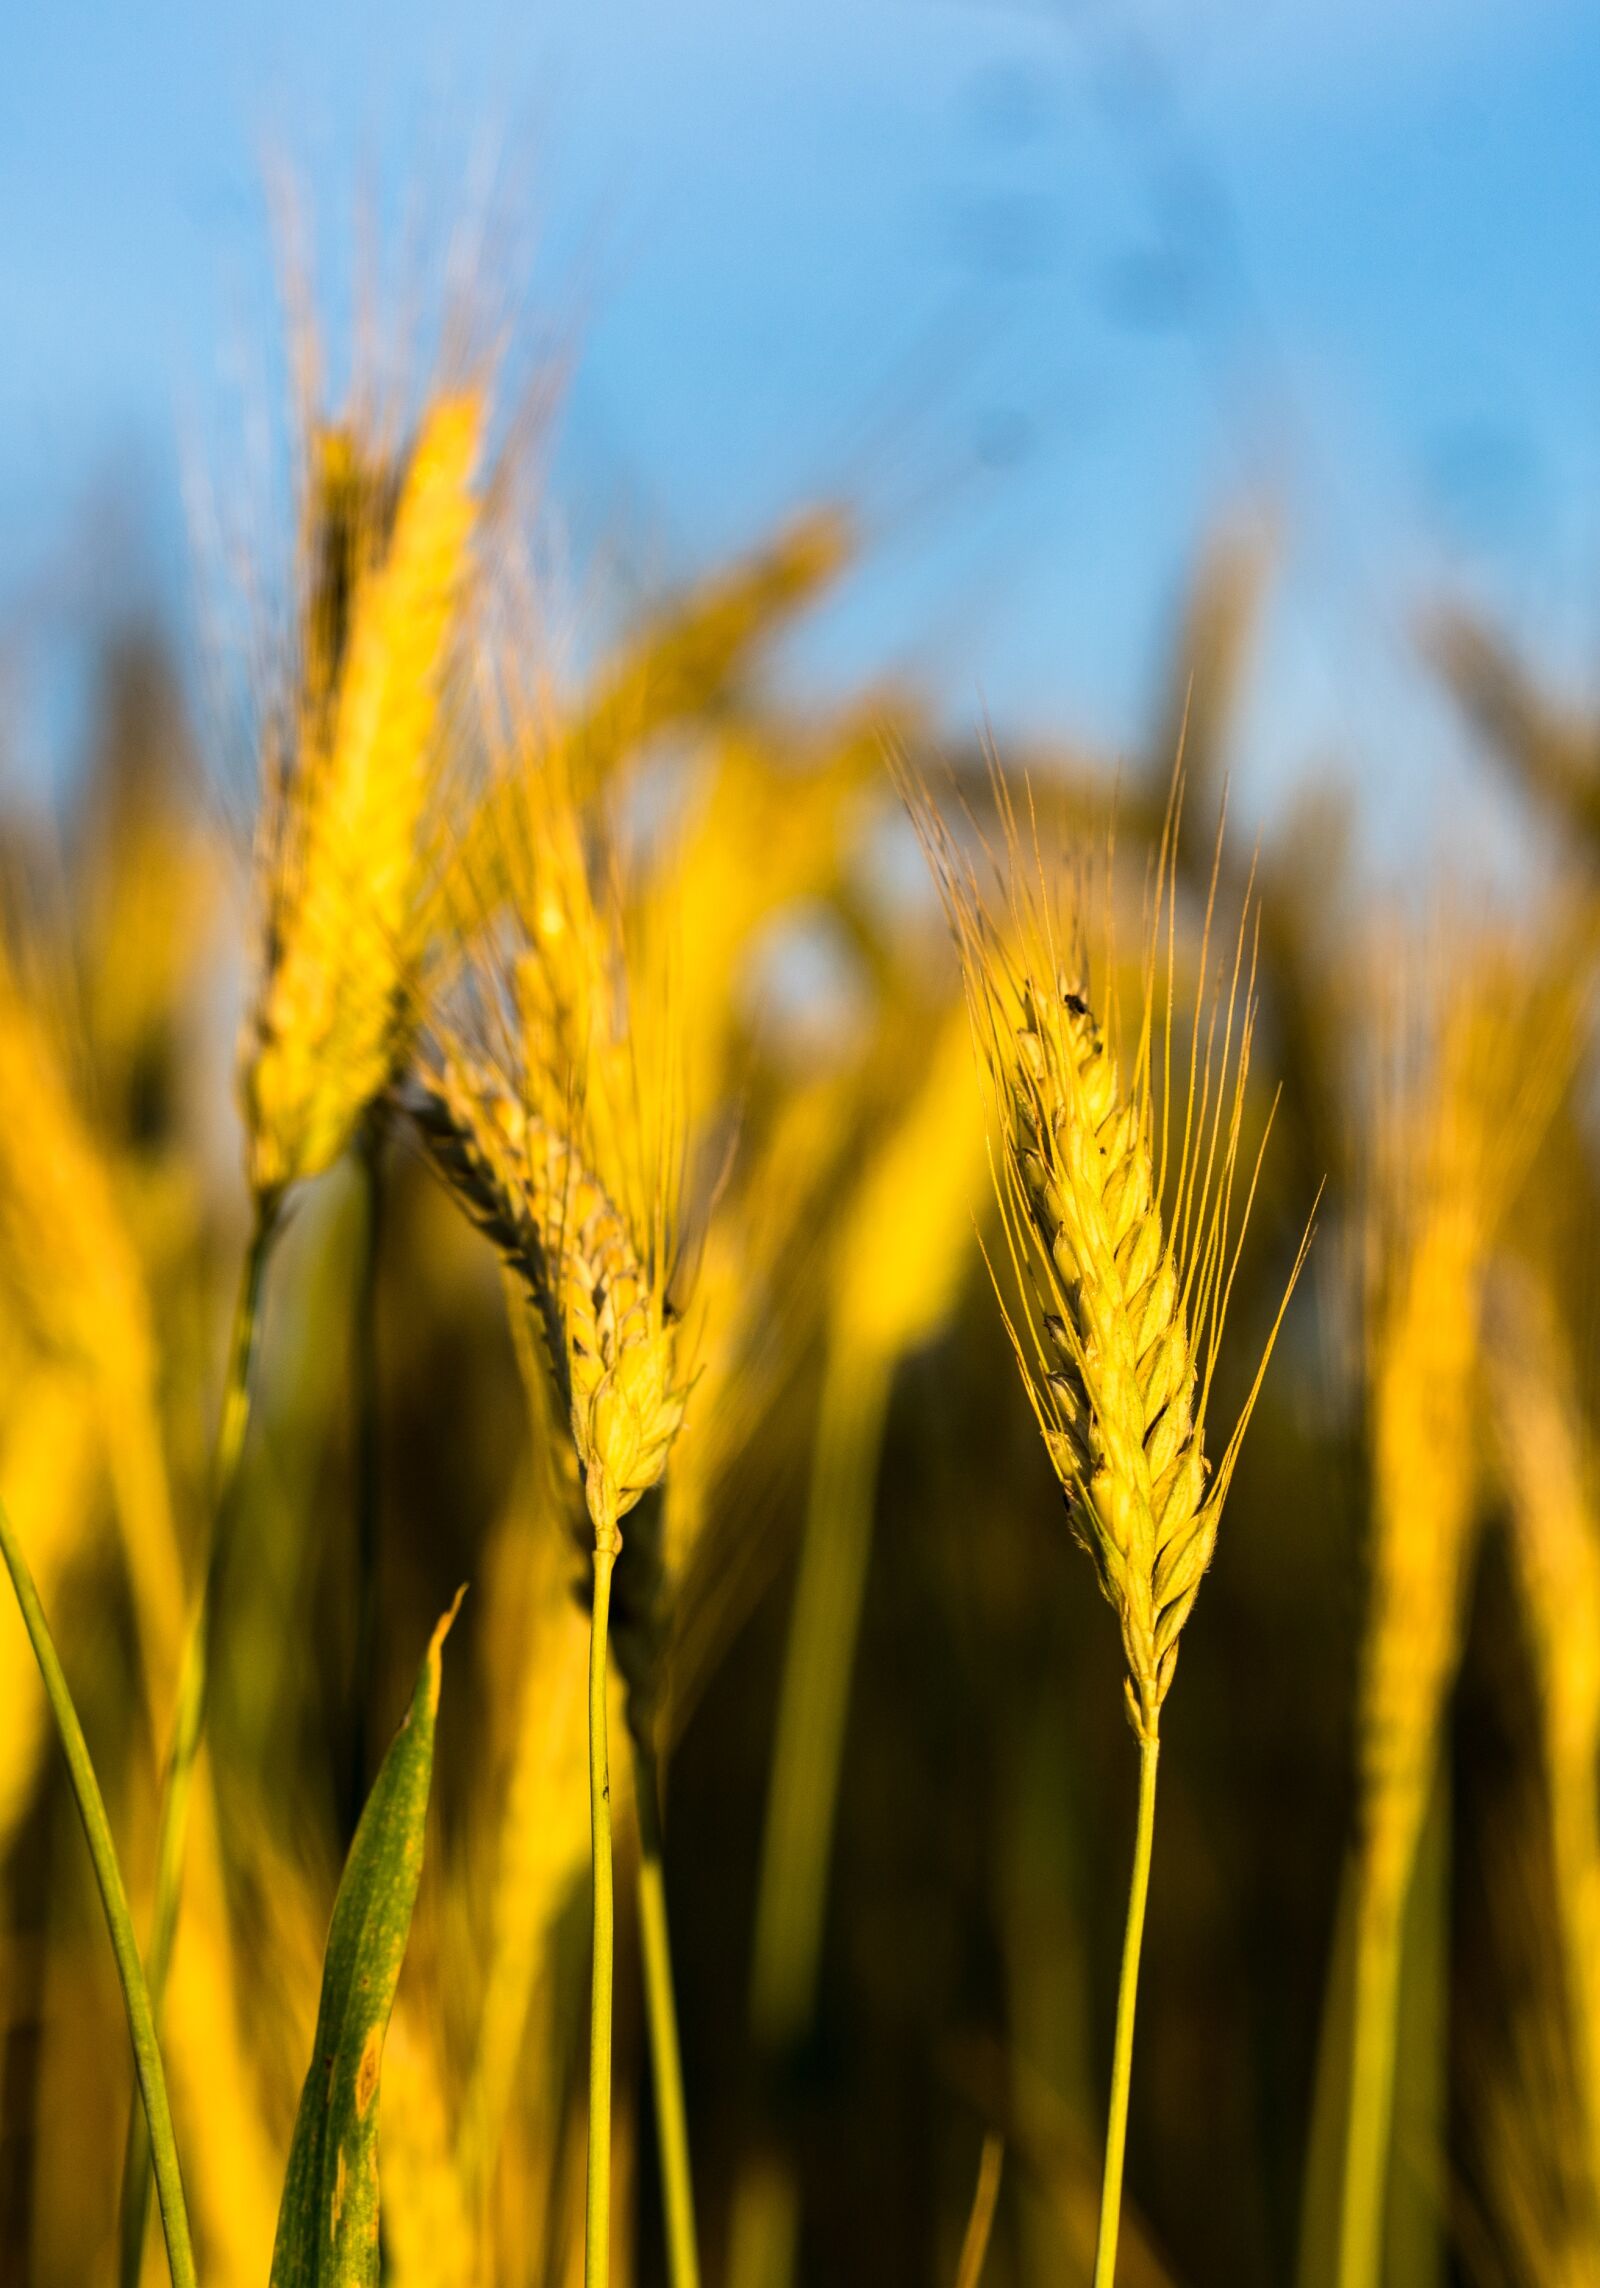 ZEISS Batis 85mm F1.8 sample photo. Cereals, wheat, growth photography